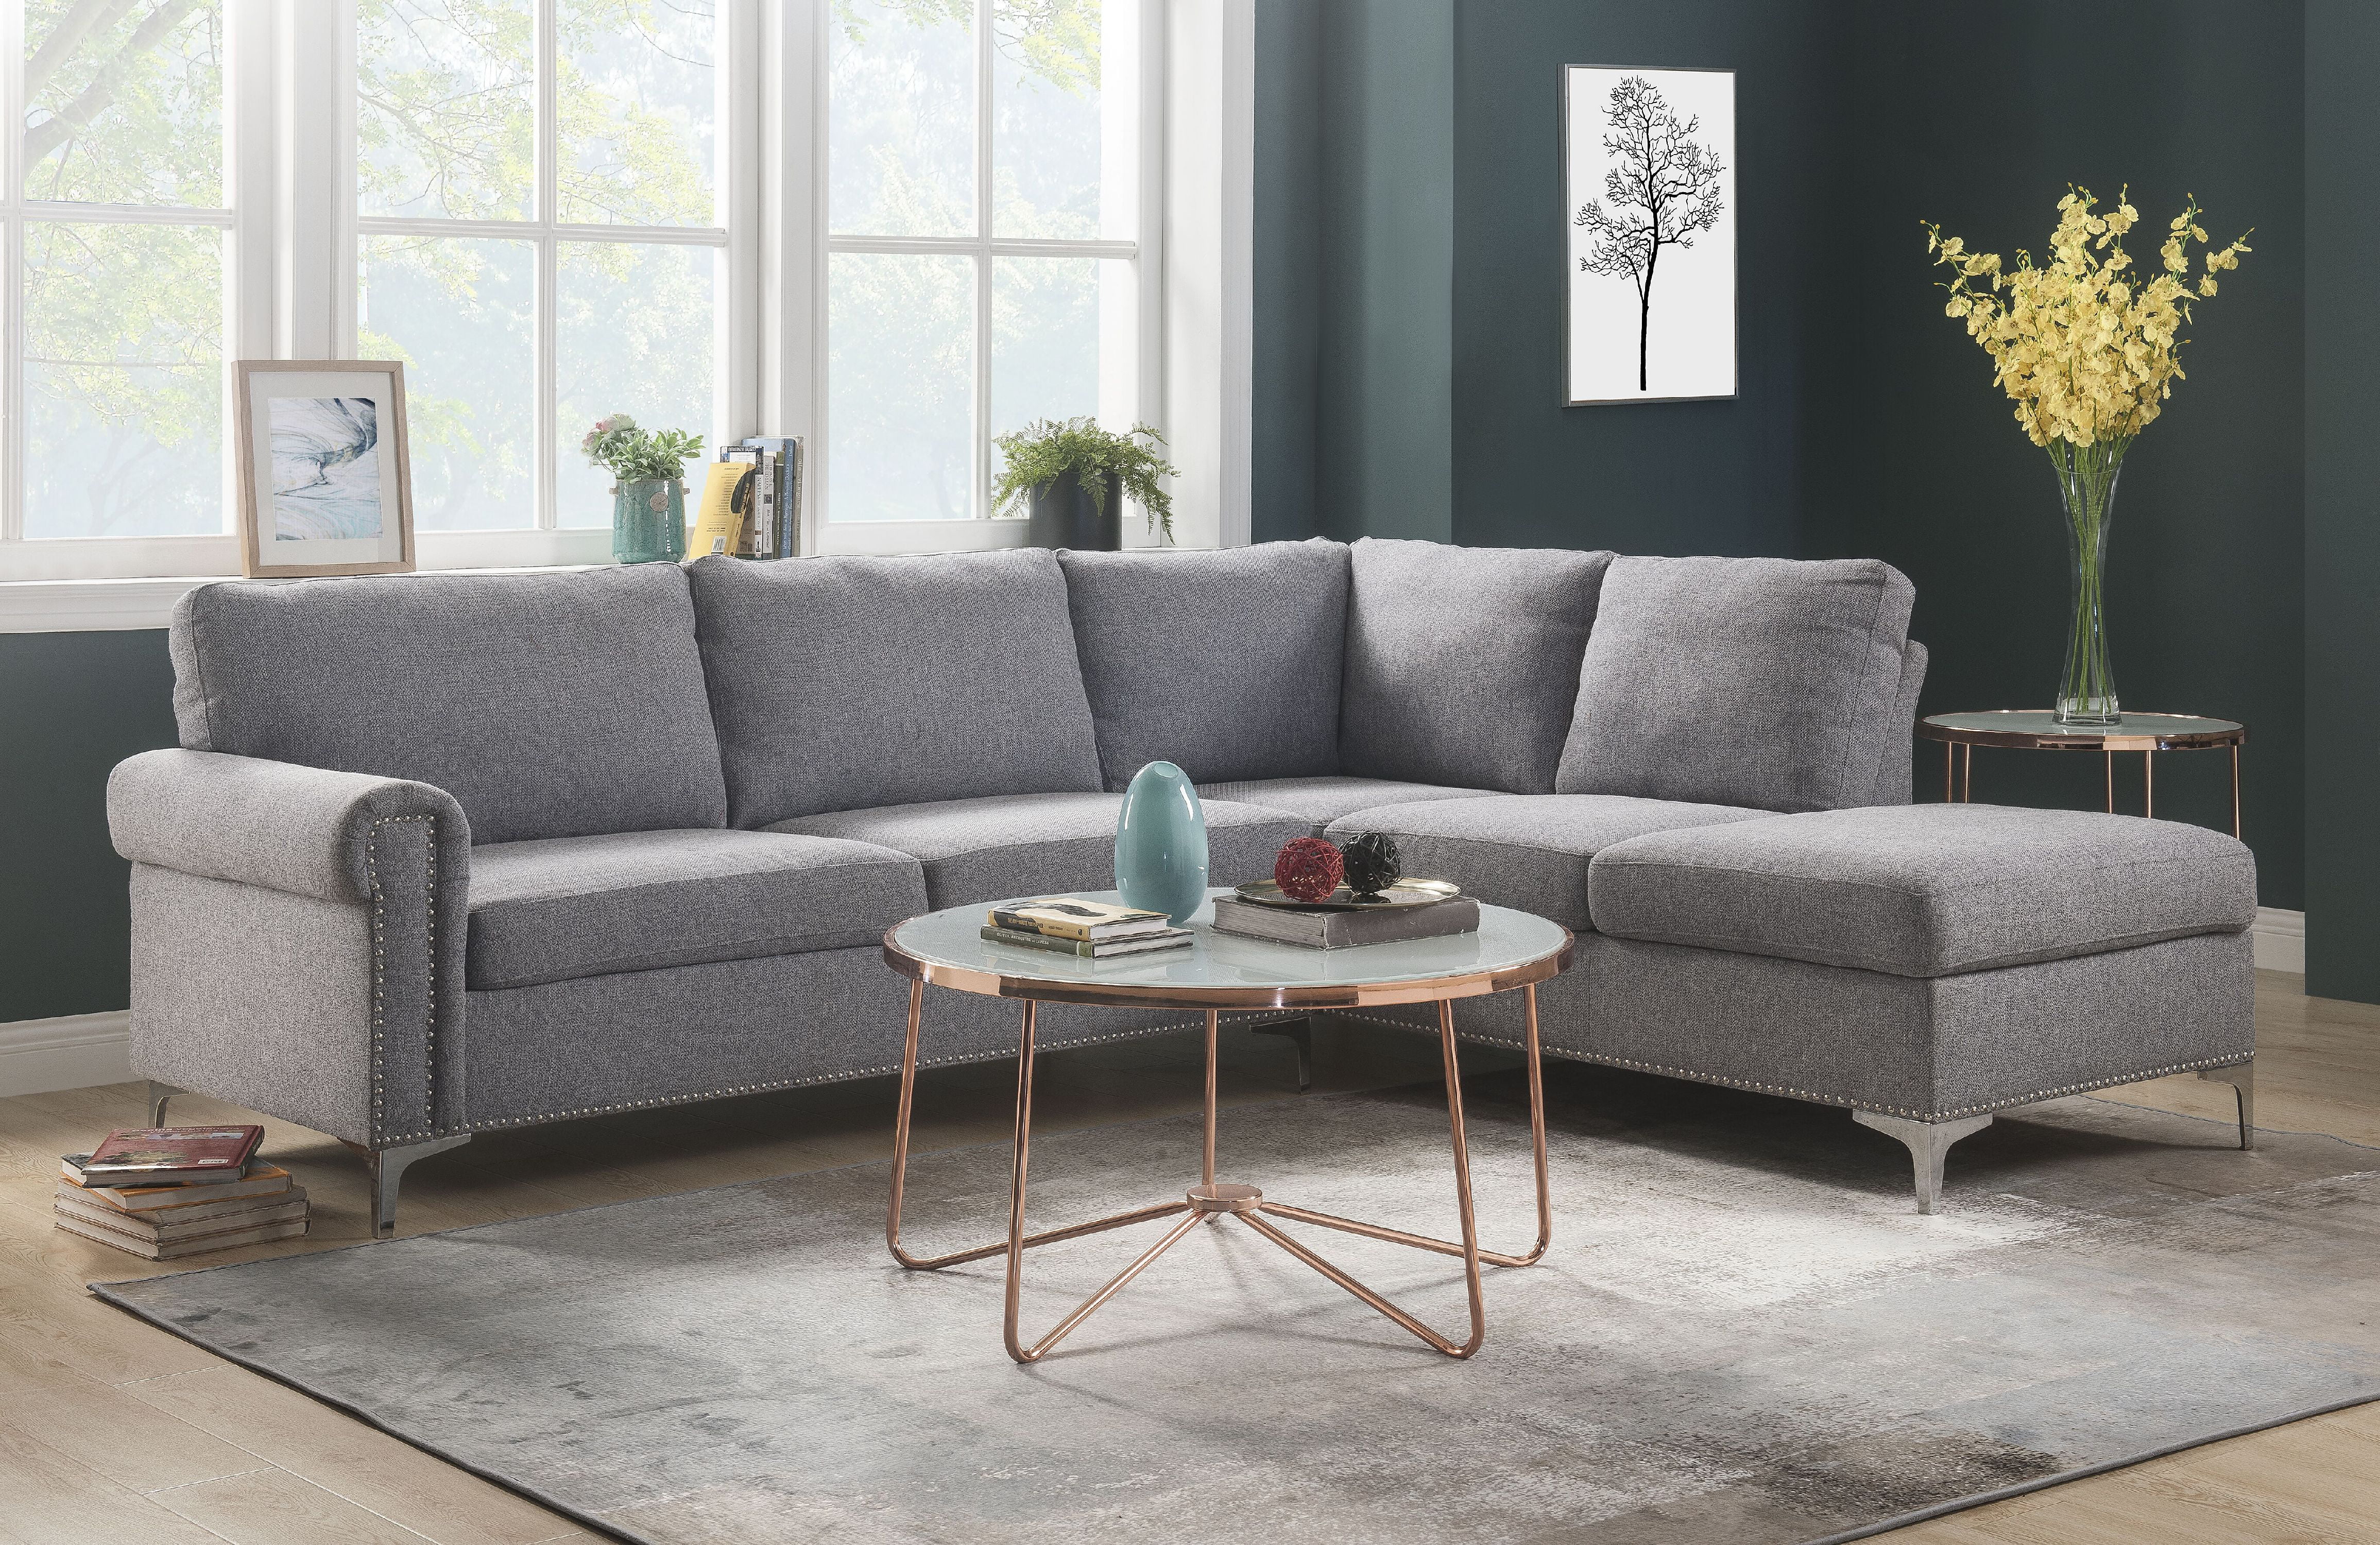 Acme Melvyn Sectional Sofa In Gray, Sectional Sofa Grey Fabric